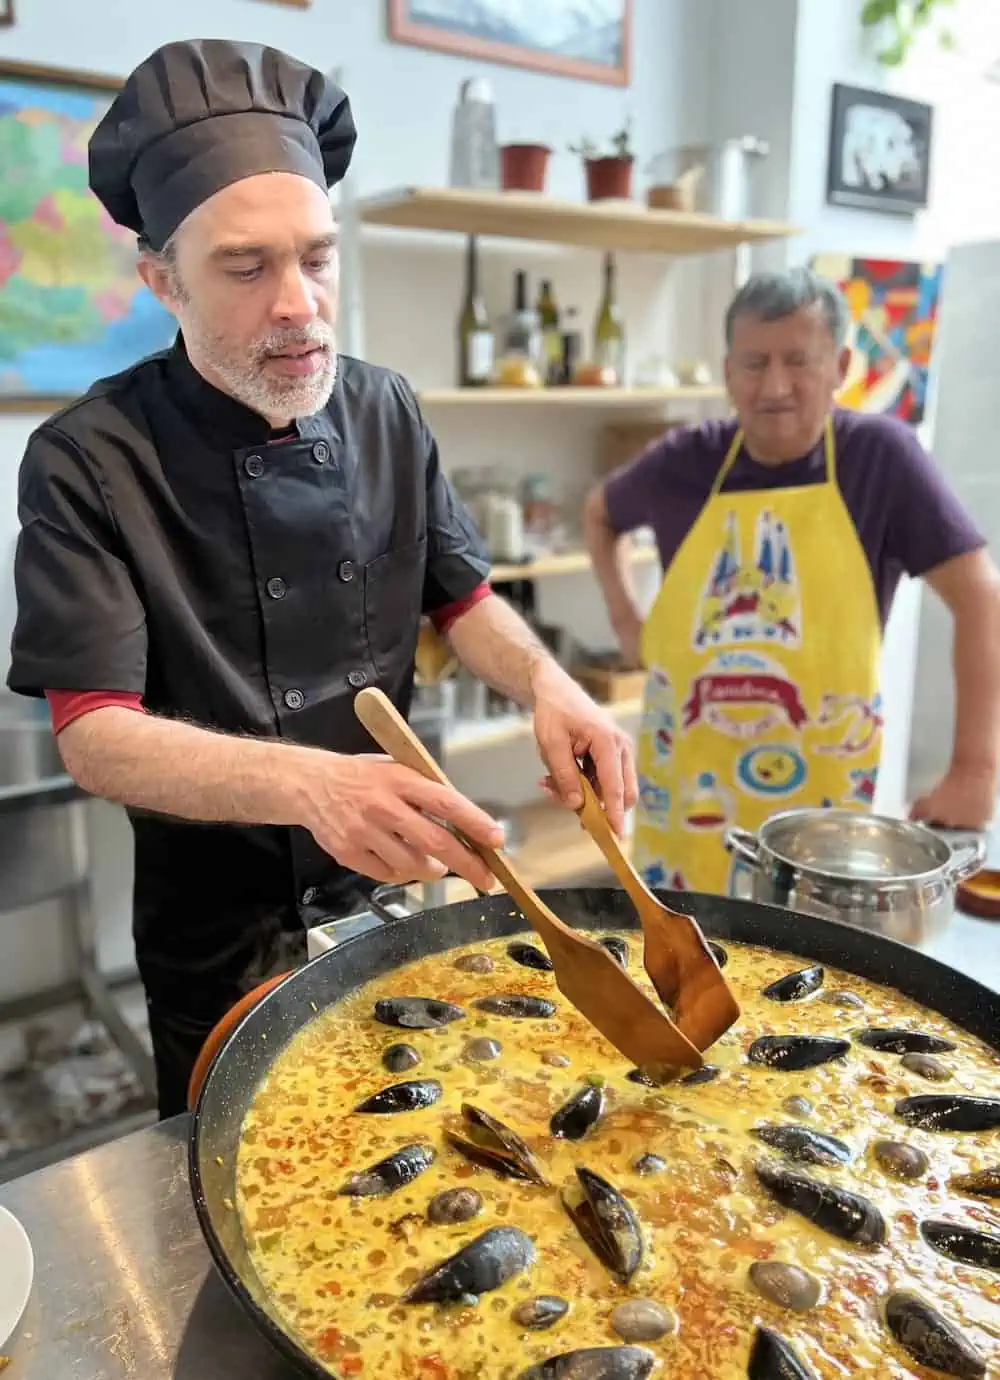 Chef Gabriel demonstrating cooking techniques at Gastronomic Arts Barcelona.